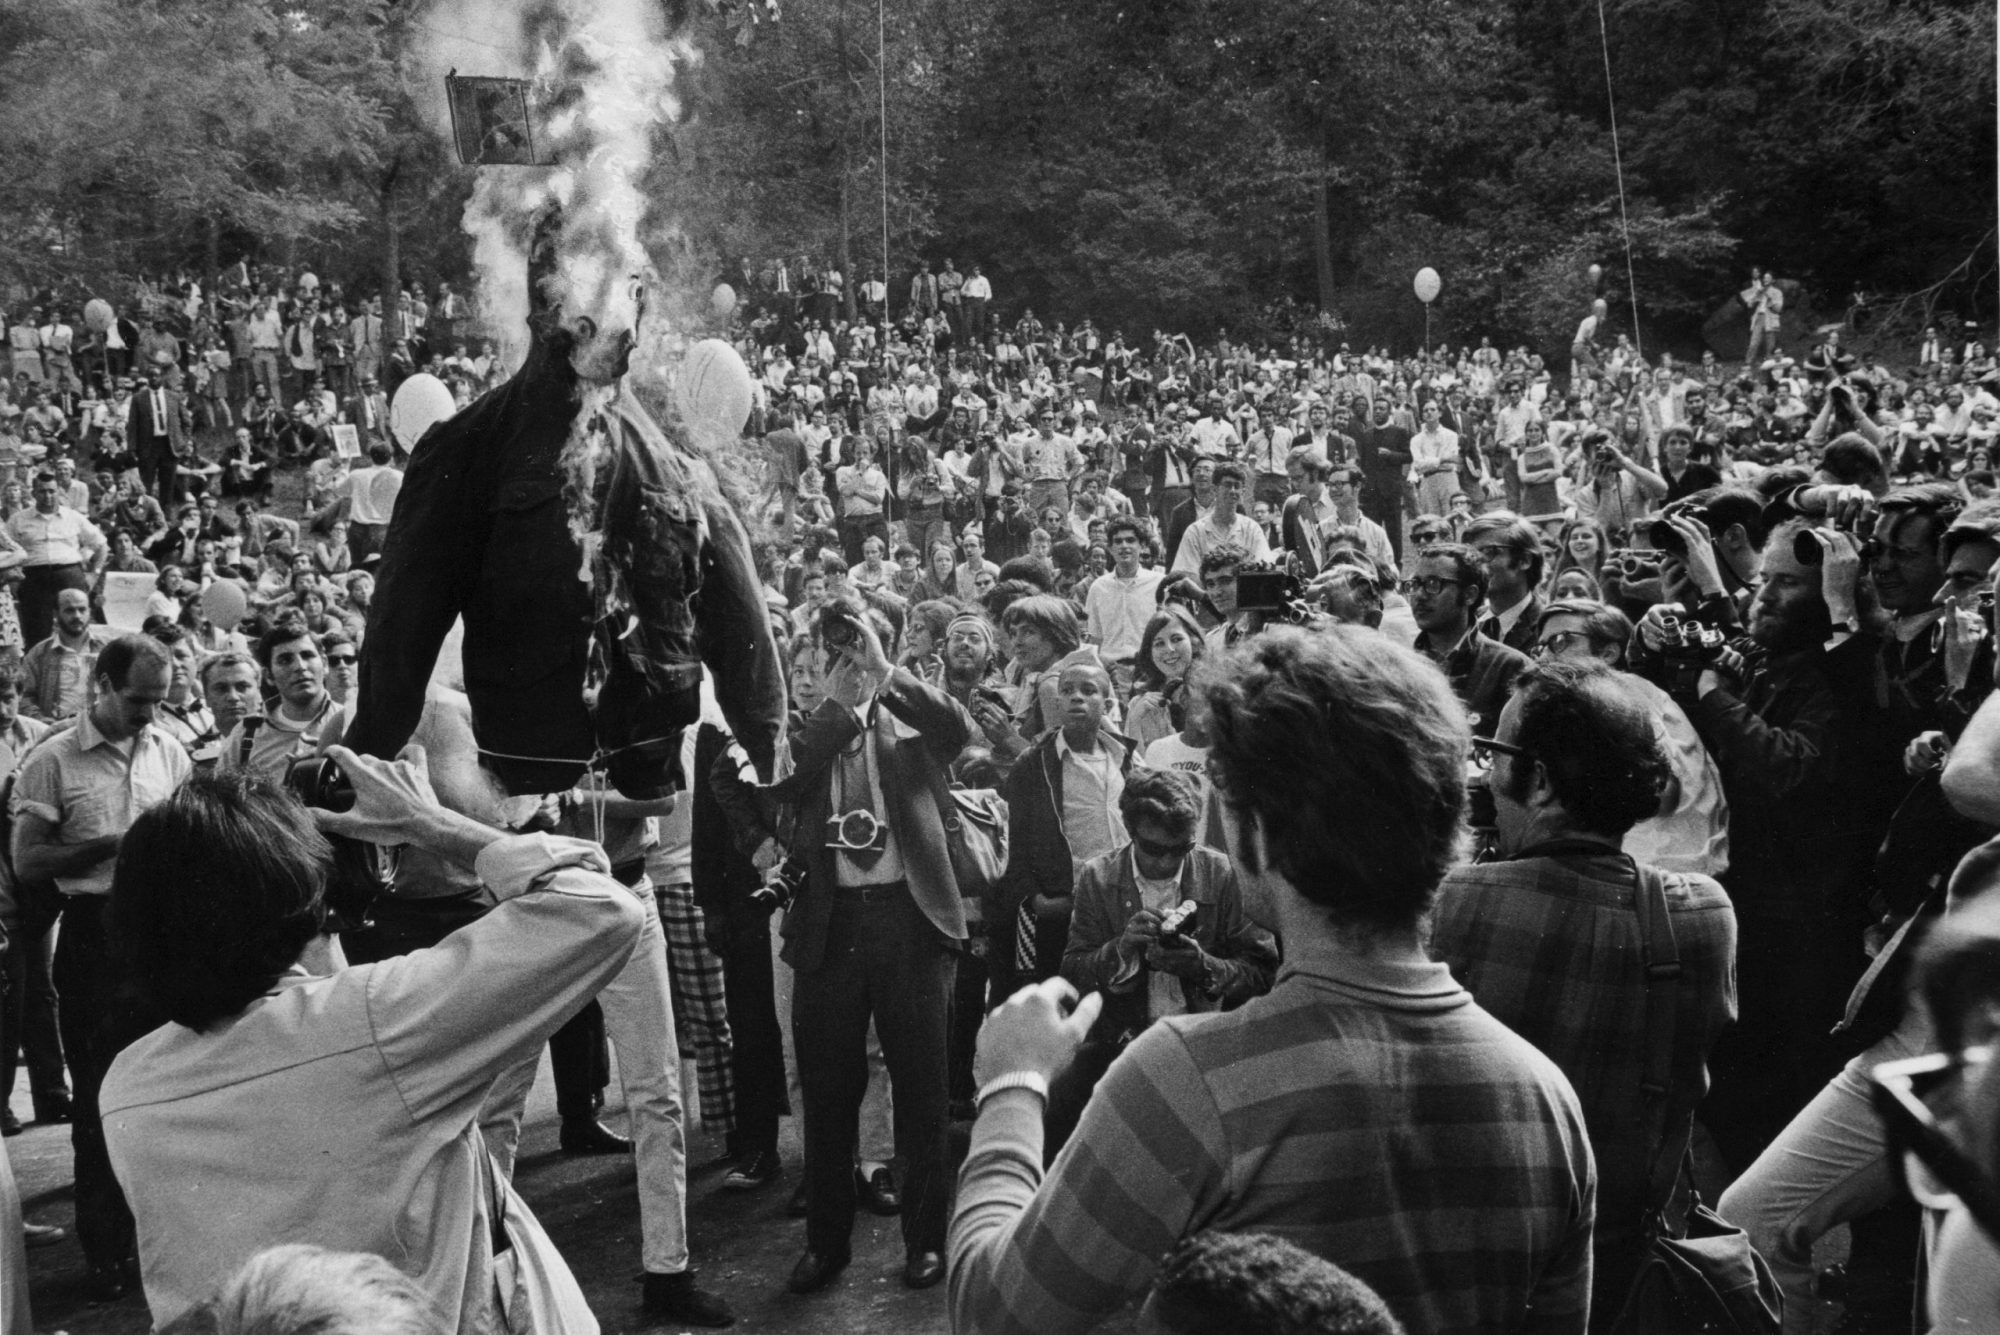 Students burn an effigy of Columbia University's president Grayson Kirk at a protest rally in Morningside Park in Manhattan on June 4, 1968. Photo by Don Jacobsen/Newsday RM via Getty Images